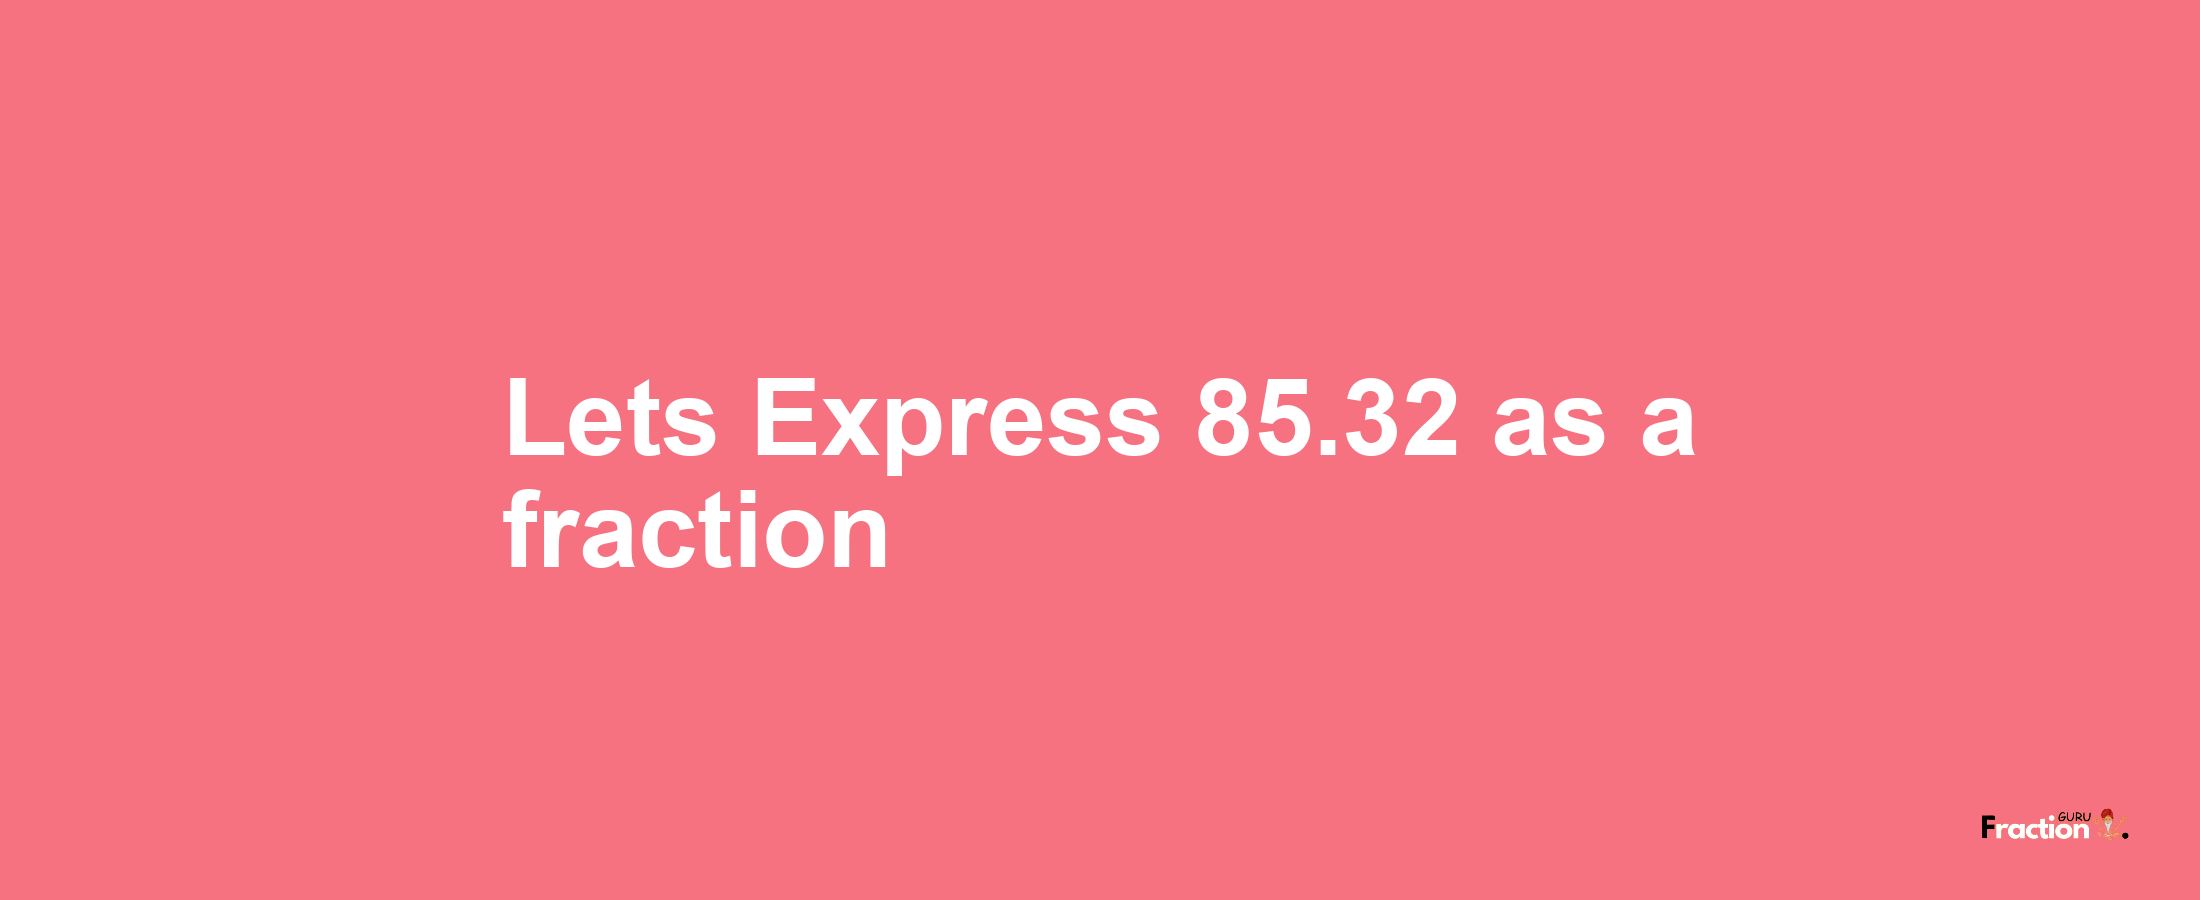 Lets Express 85.32 as afraction